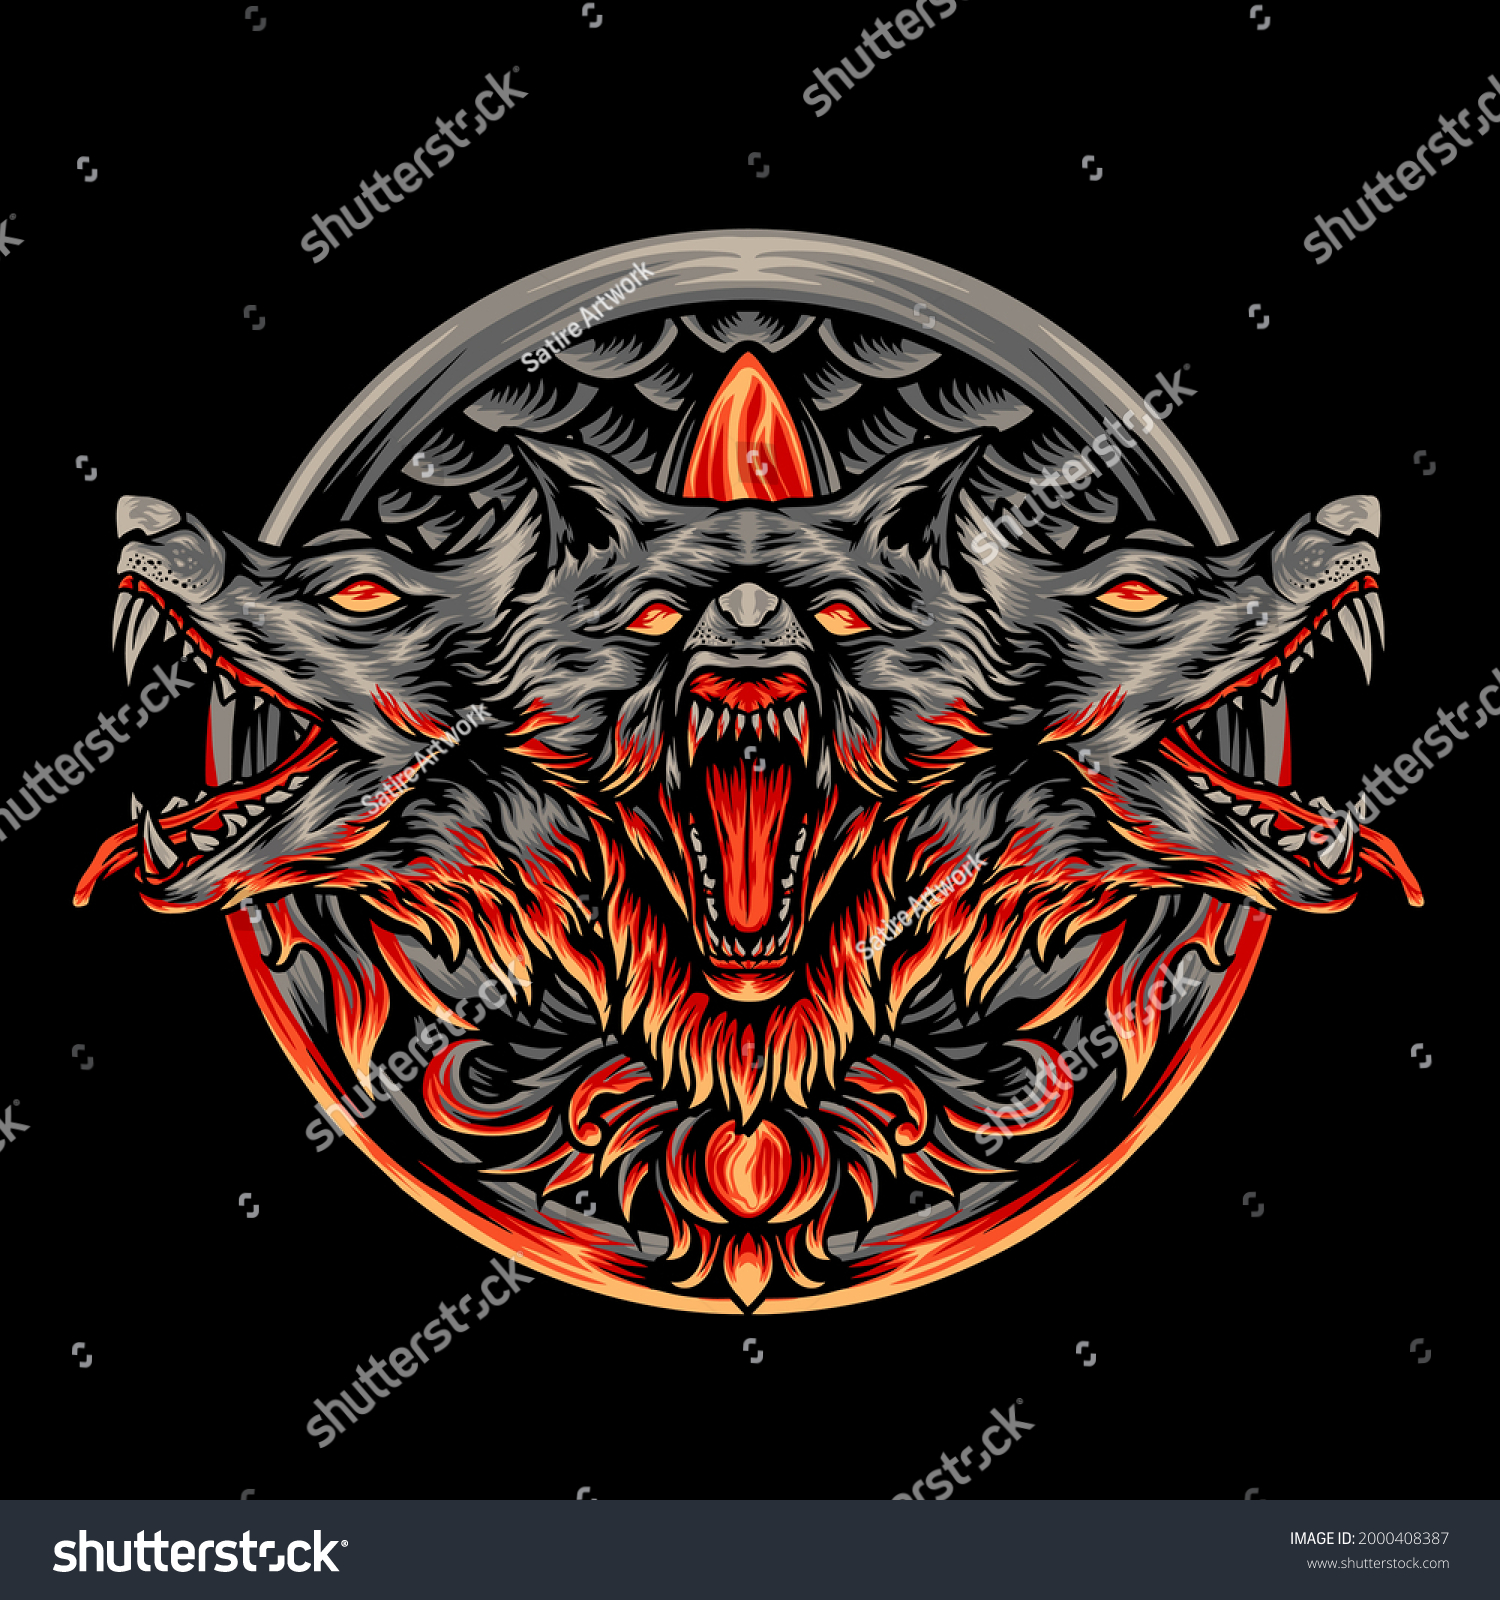 SVG of The Cerberus Mythology With Ornaments Illustration for your business or merchandise svg